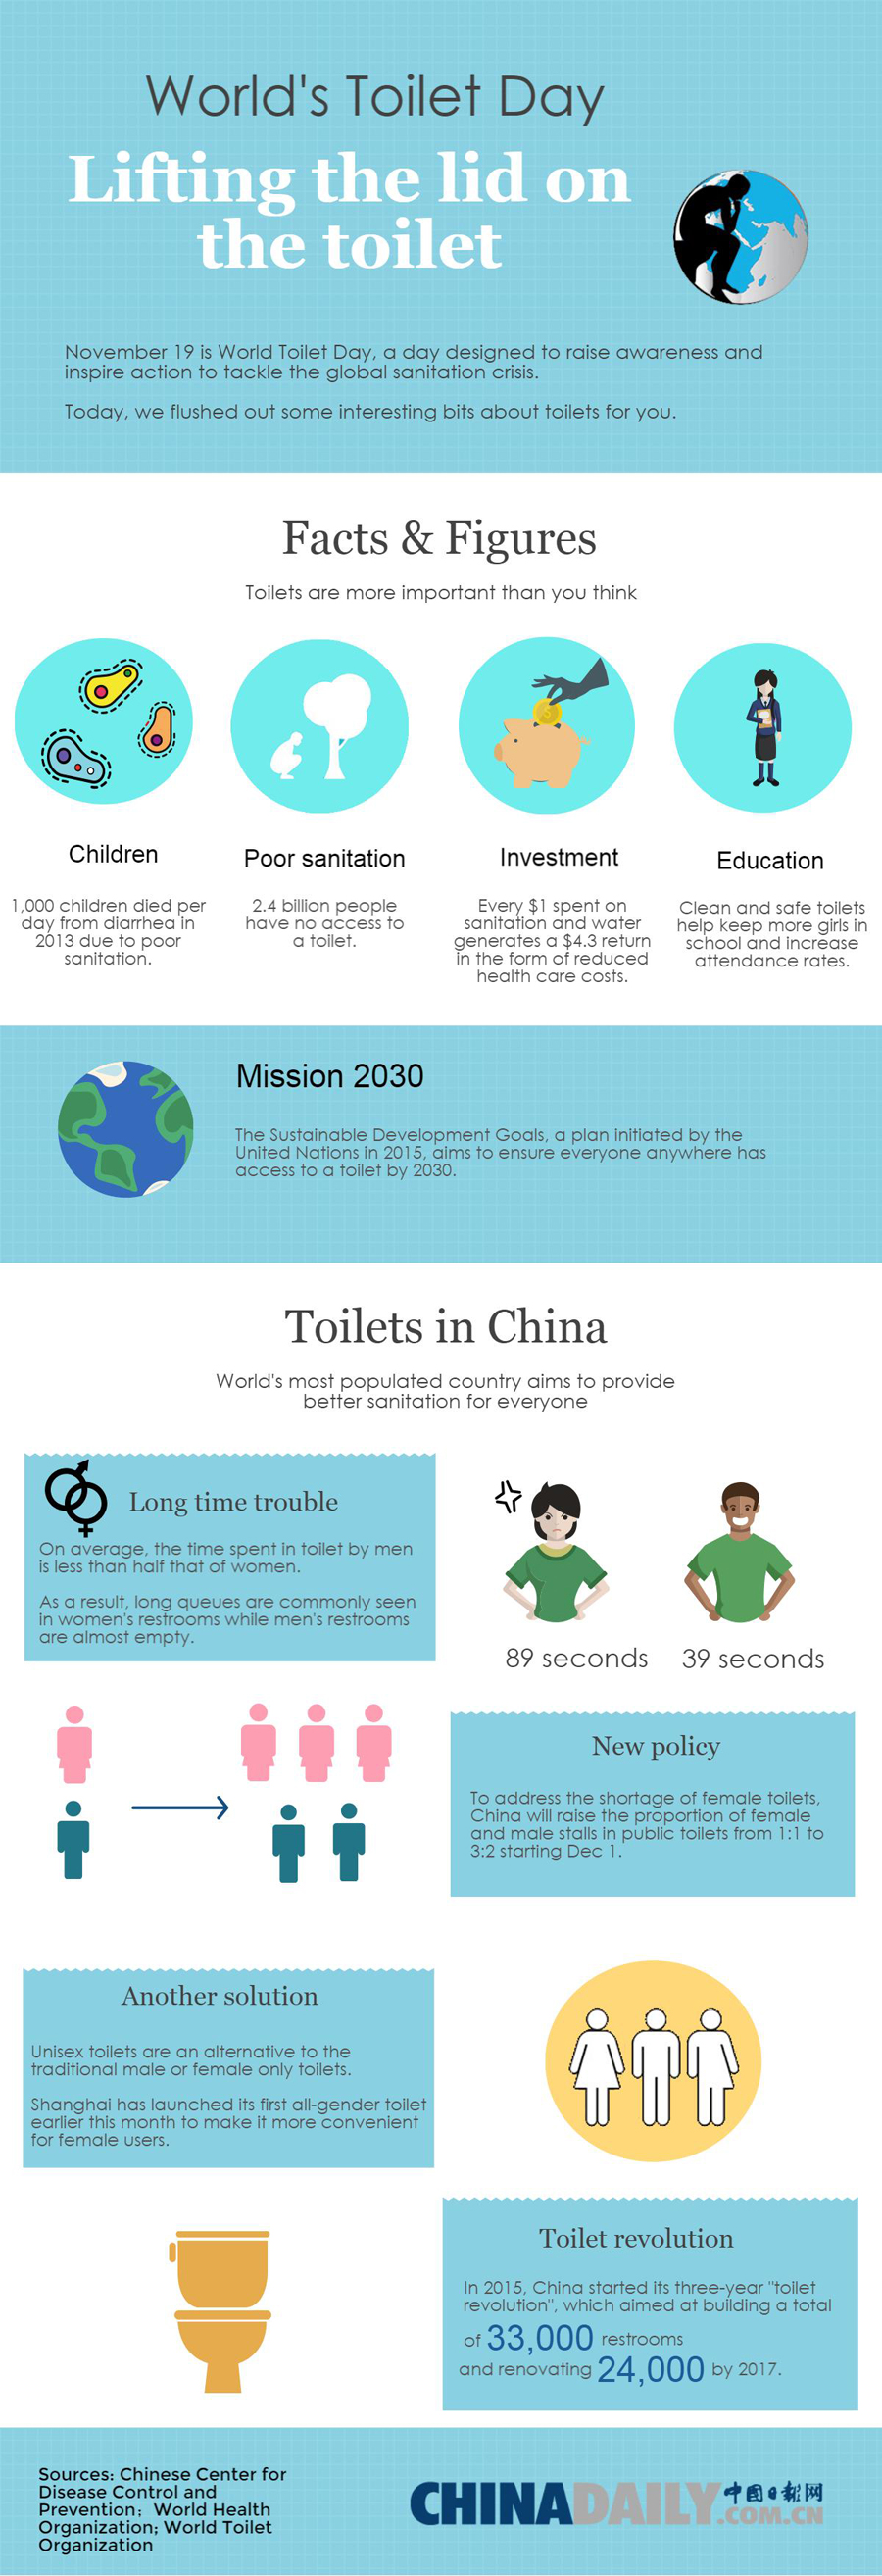 World's Toilet Day: Lifting the lid on the toilet